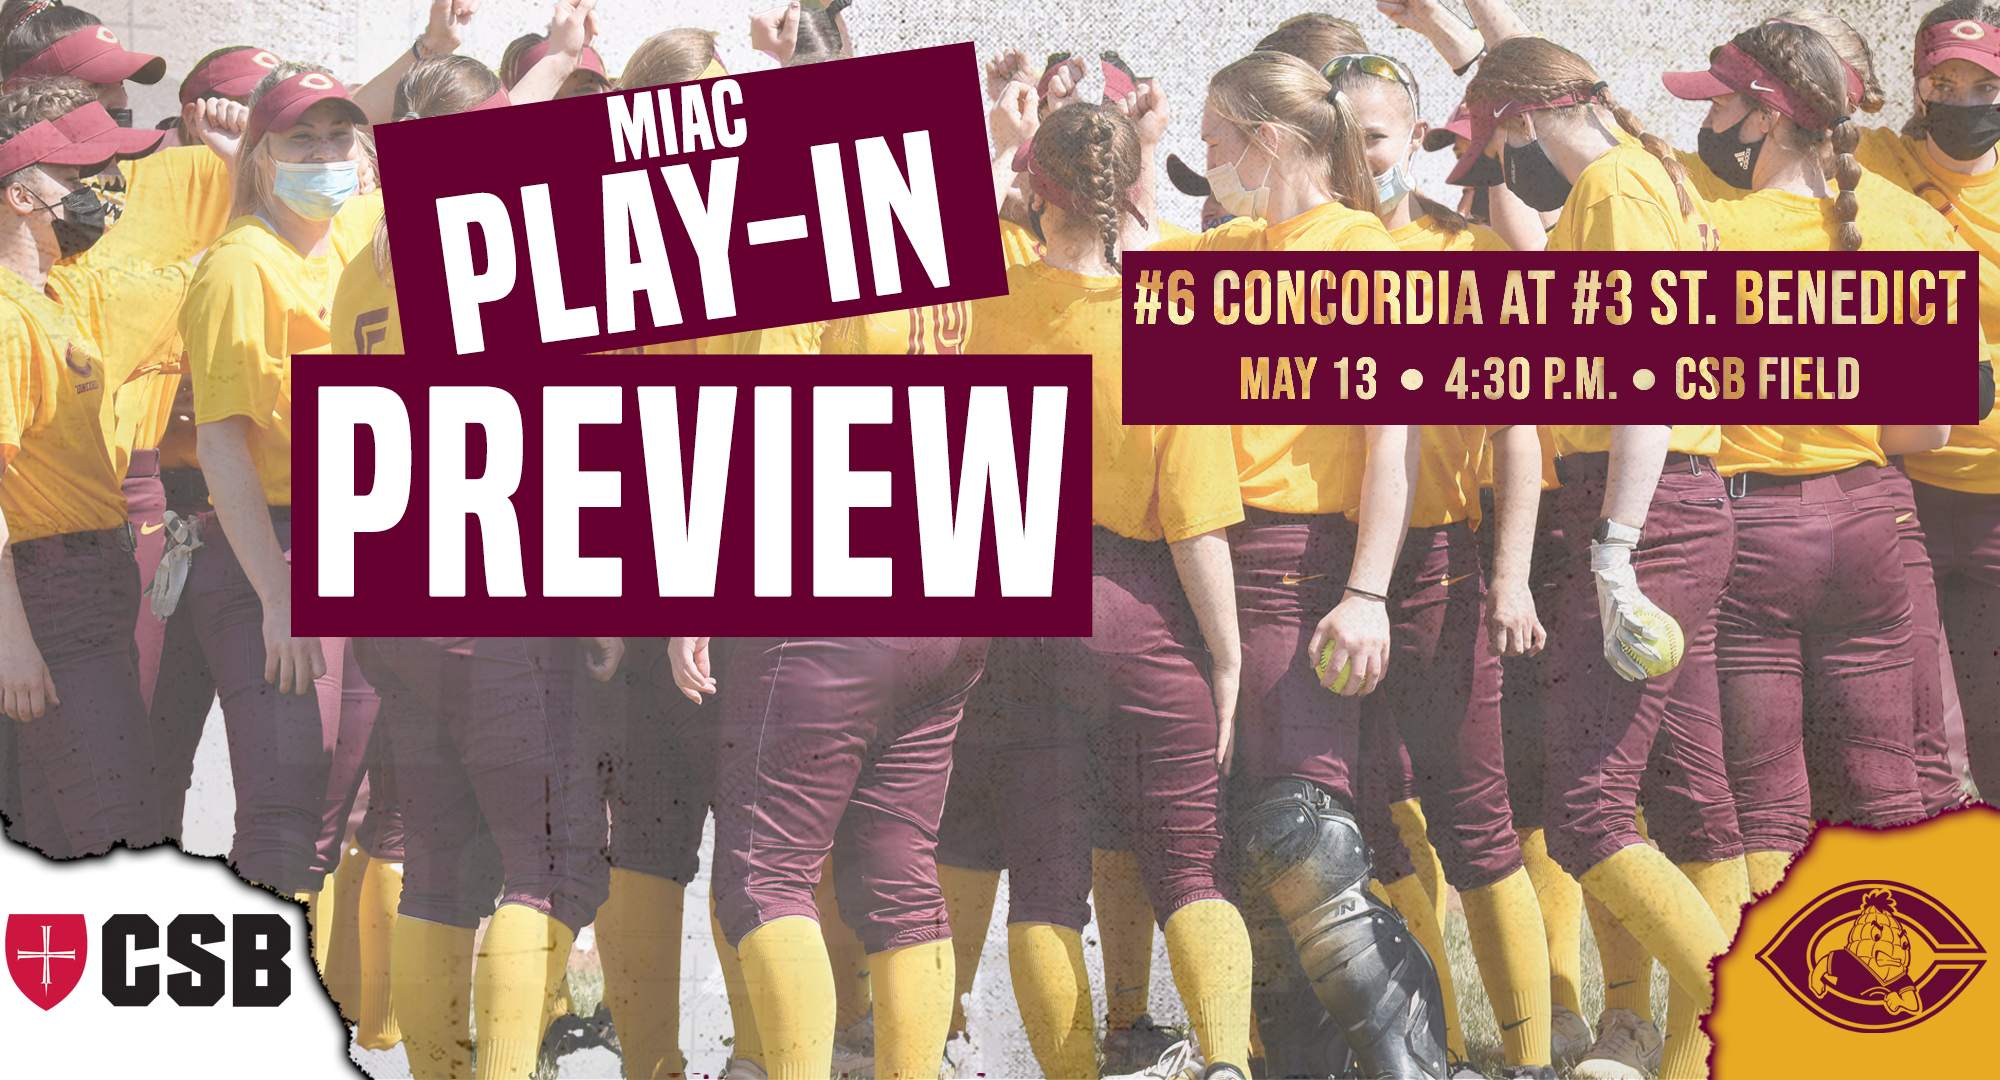 Concordia will face St. Benedict in of the two the play-in games of the MIAC softball playoffs on Thursday, May 13 at 4:30 p.m. in St. Joseph.